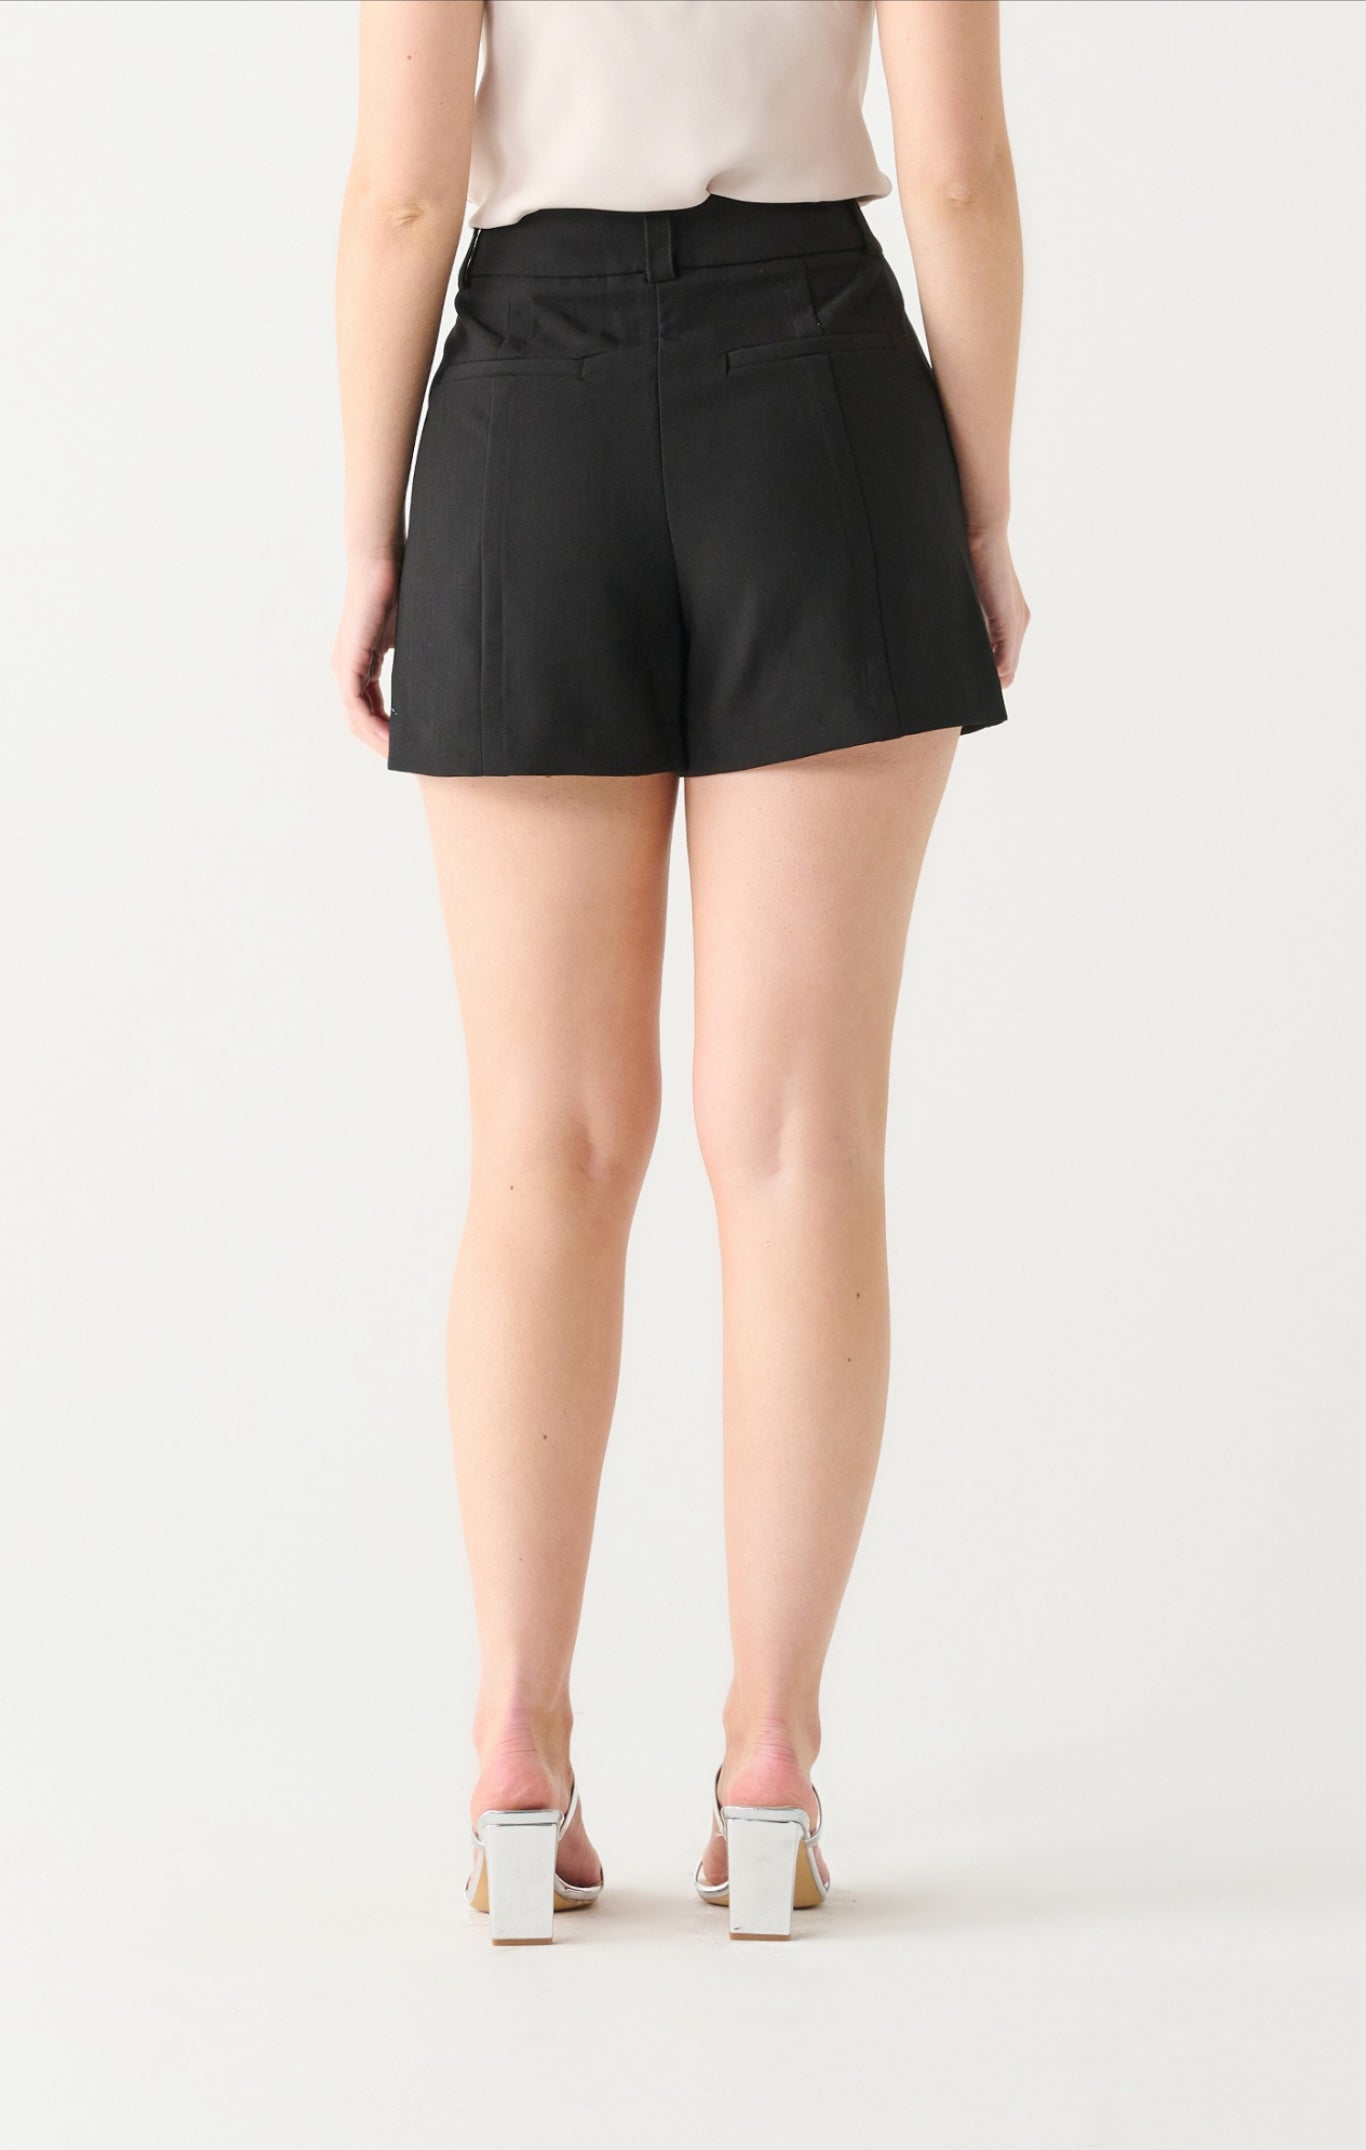 Black Tape High Waisted Structured Short